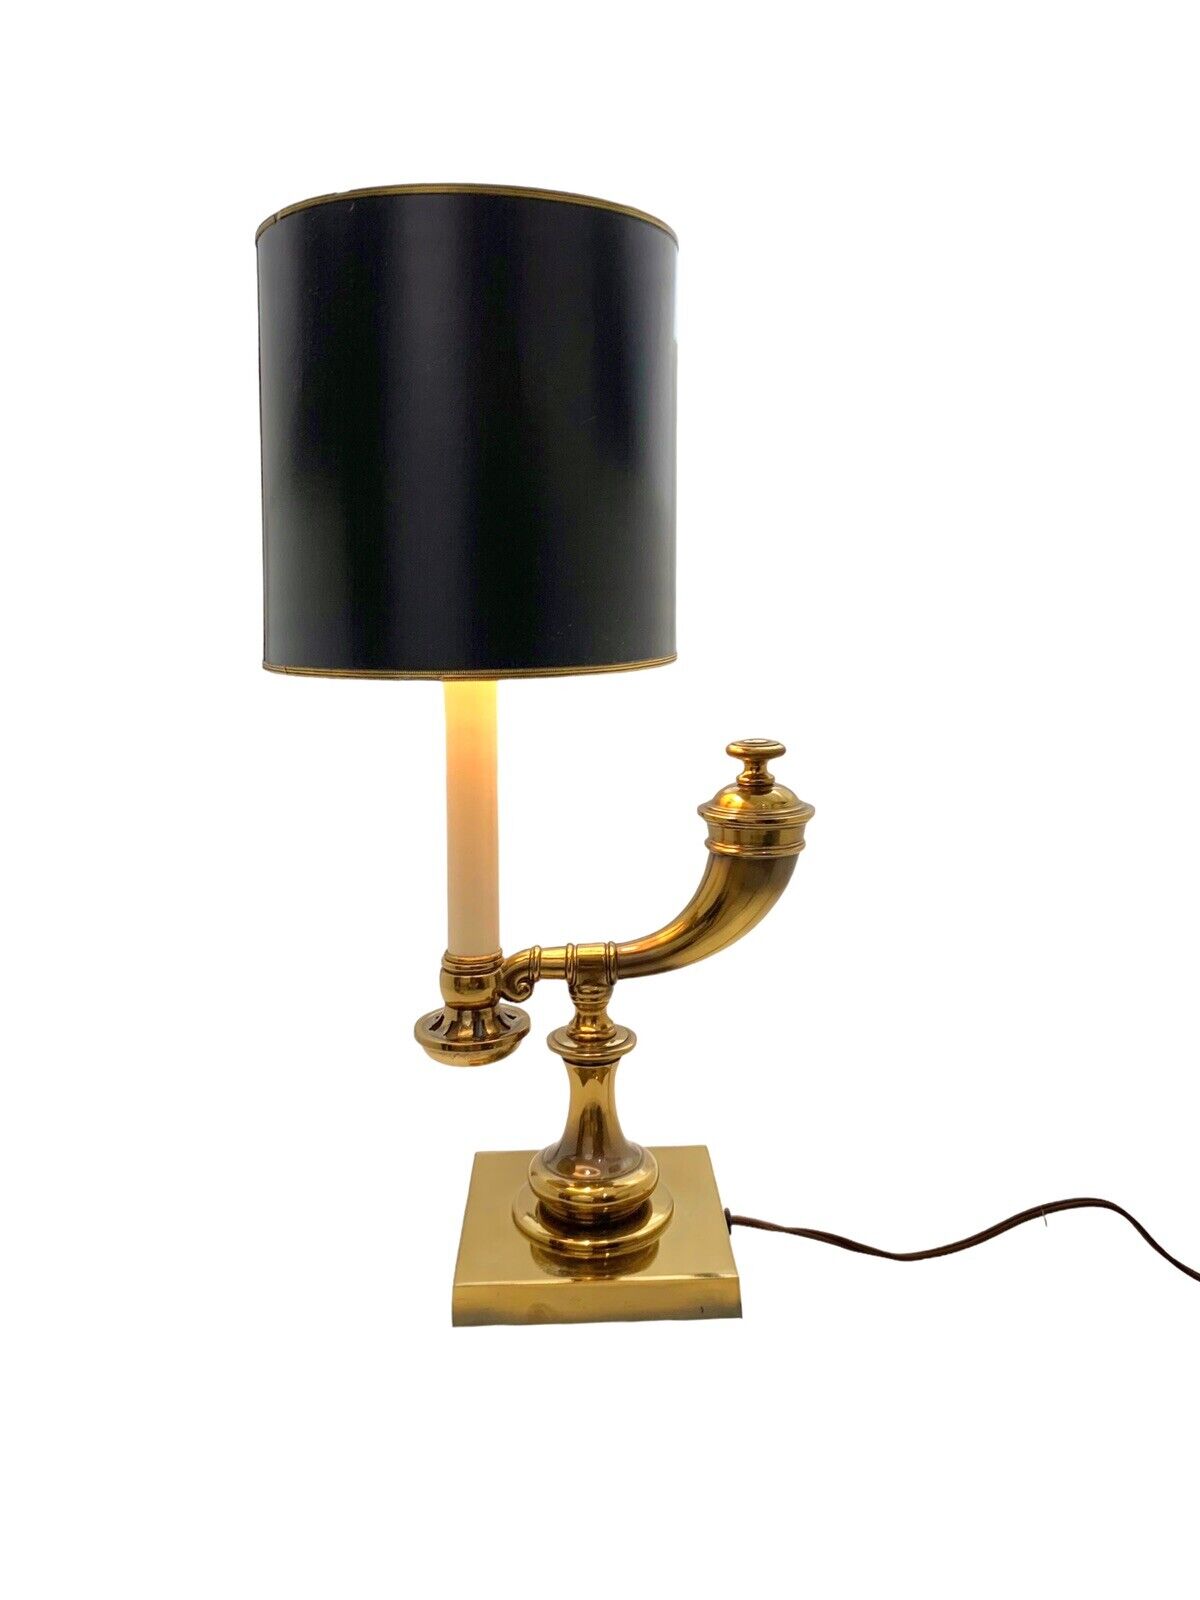 Lamp Brass French Empire Classic Style Table Lighting Vintage Decor